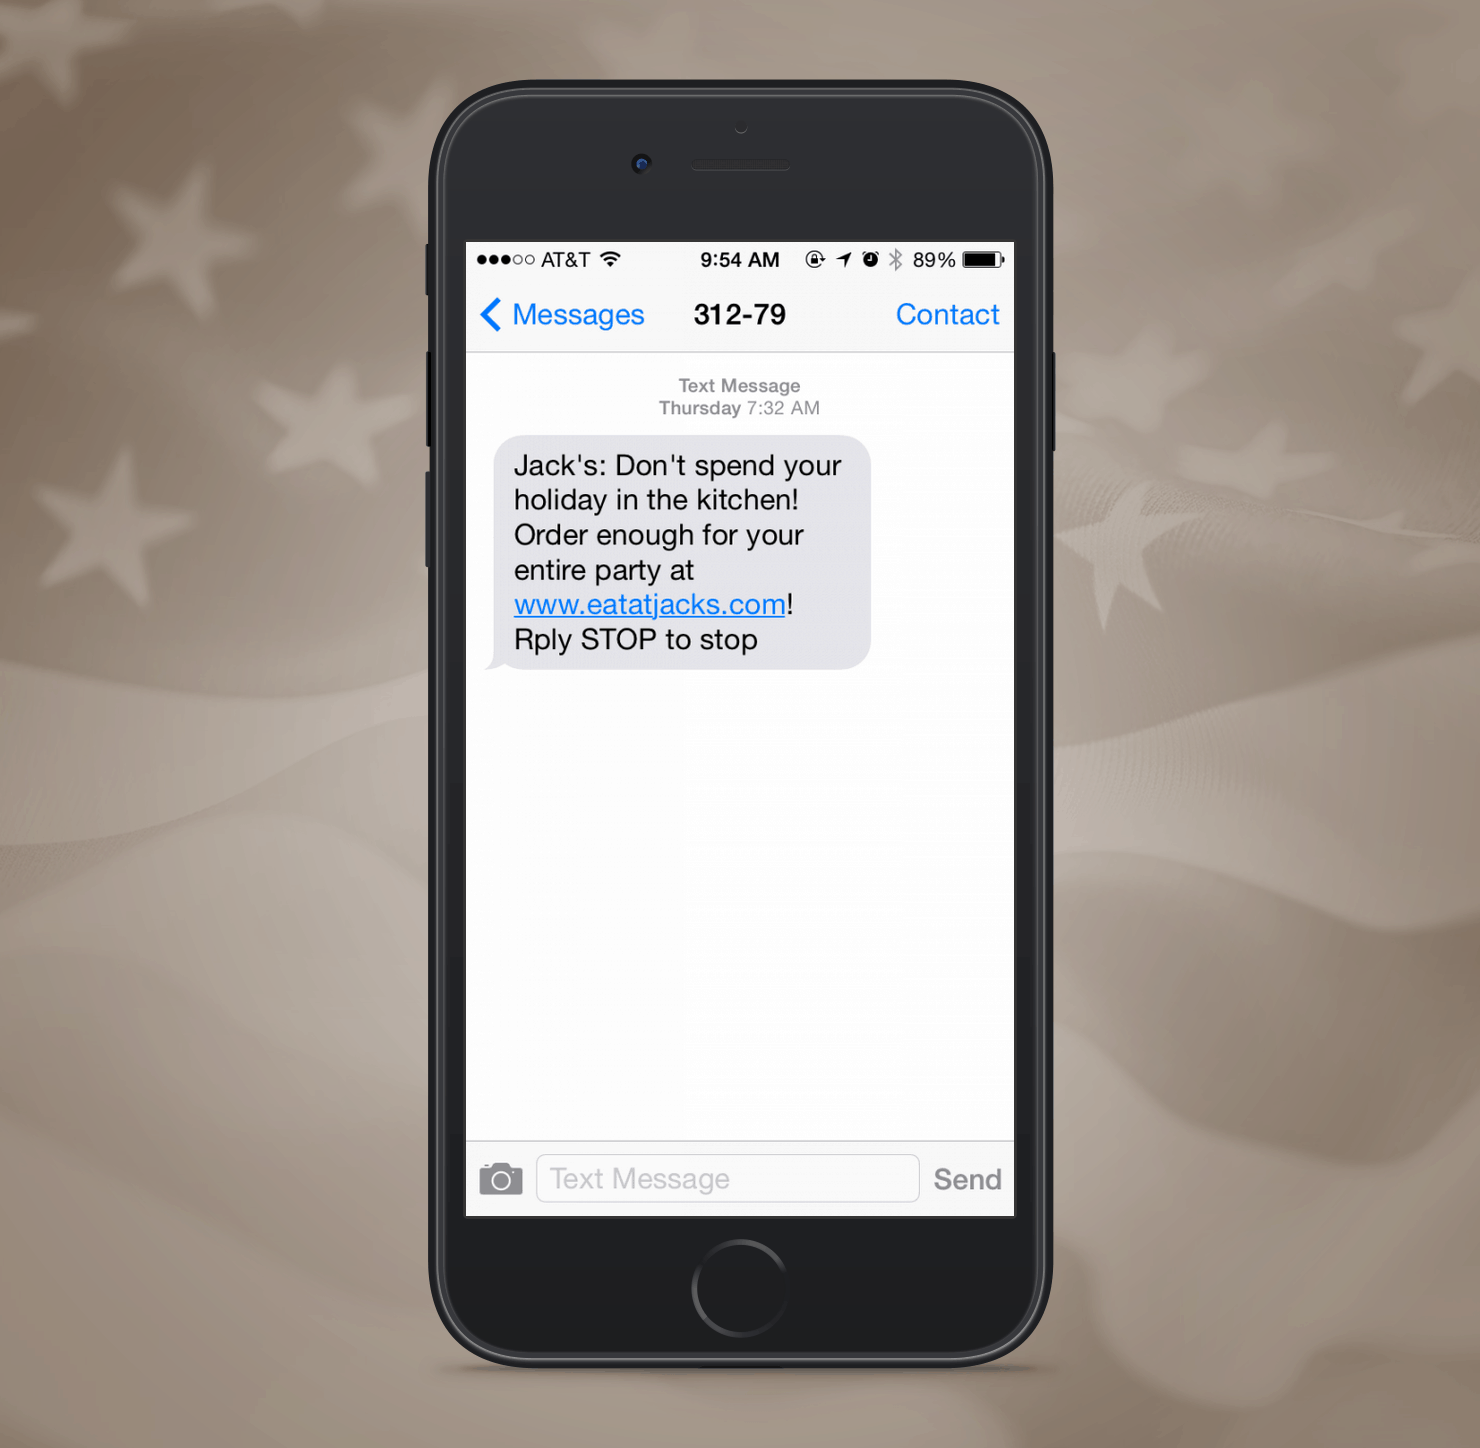 Jacks SMS Promotion Example from Independence Day